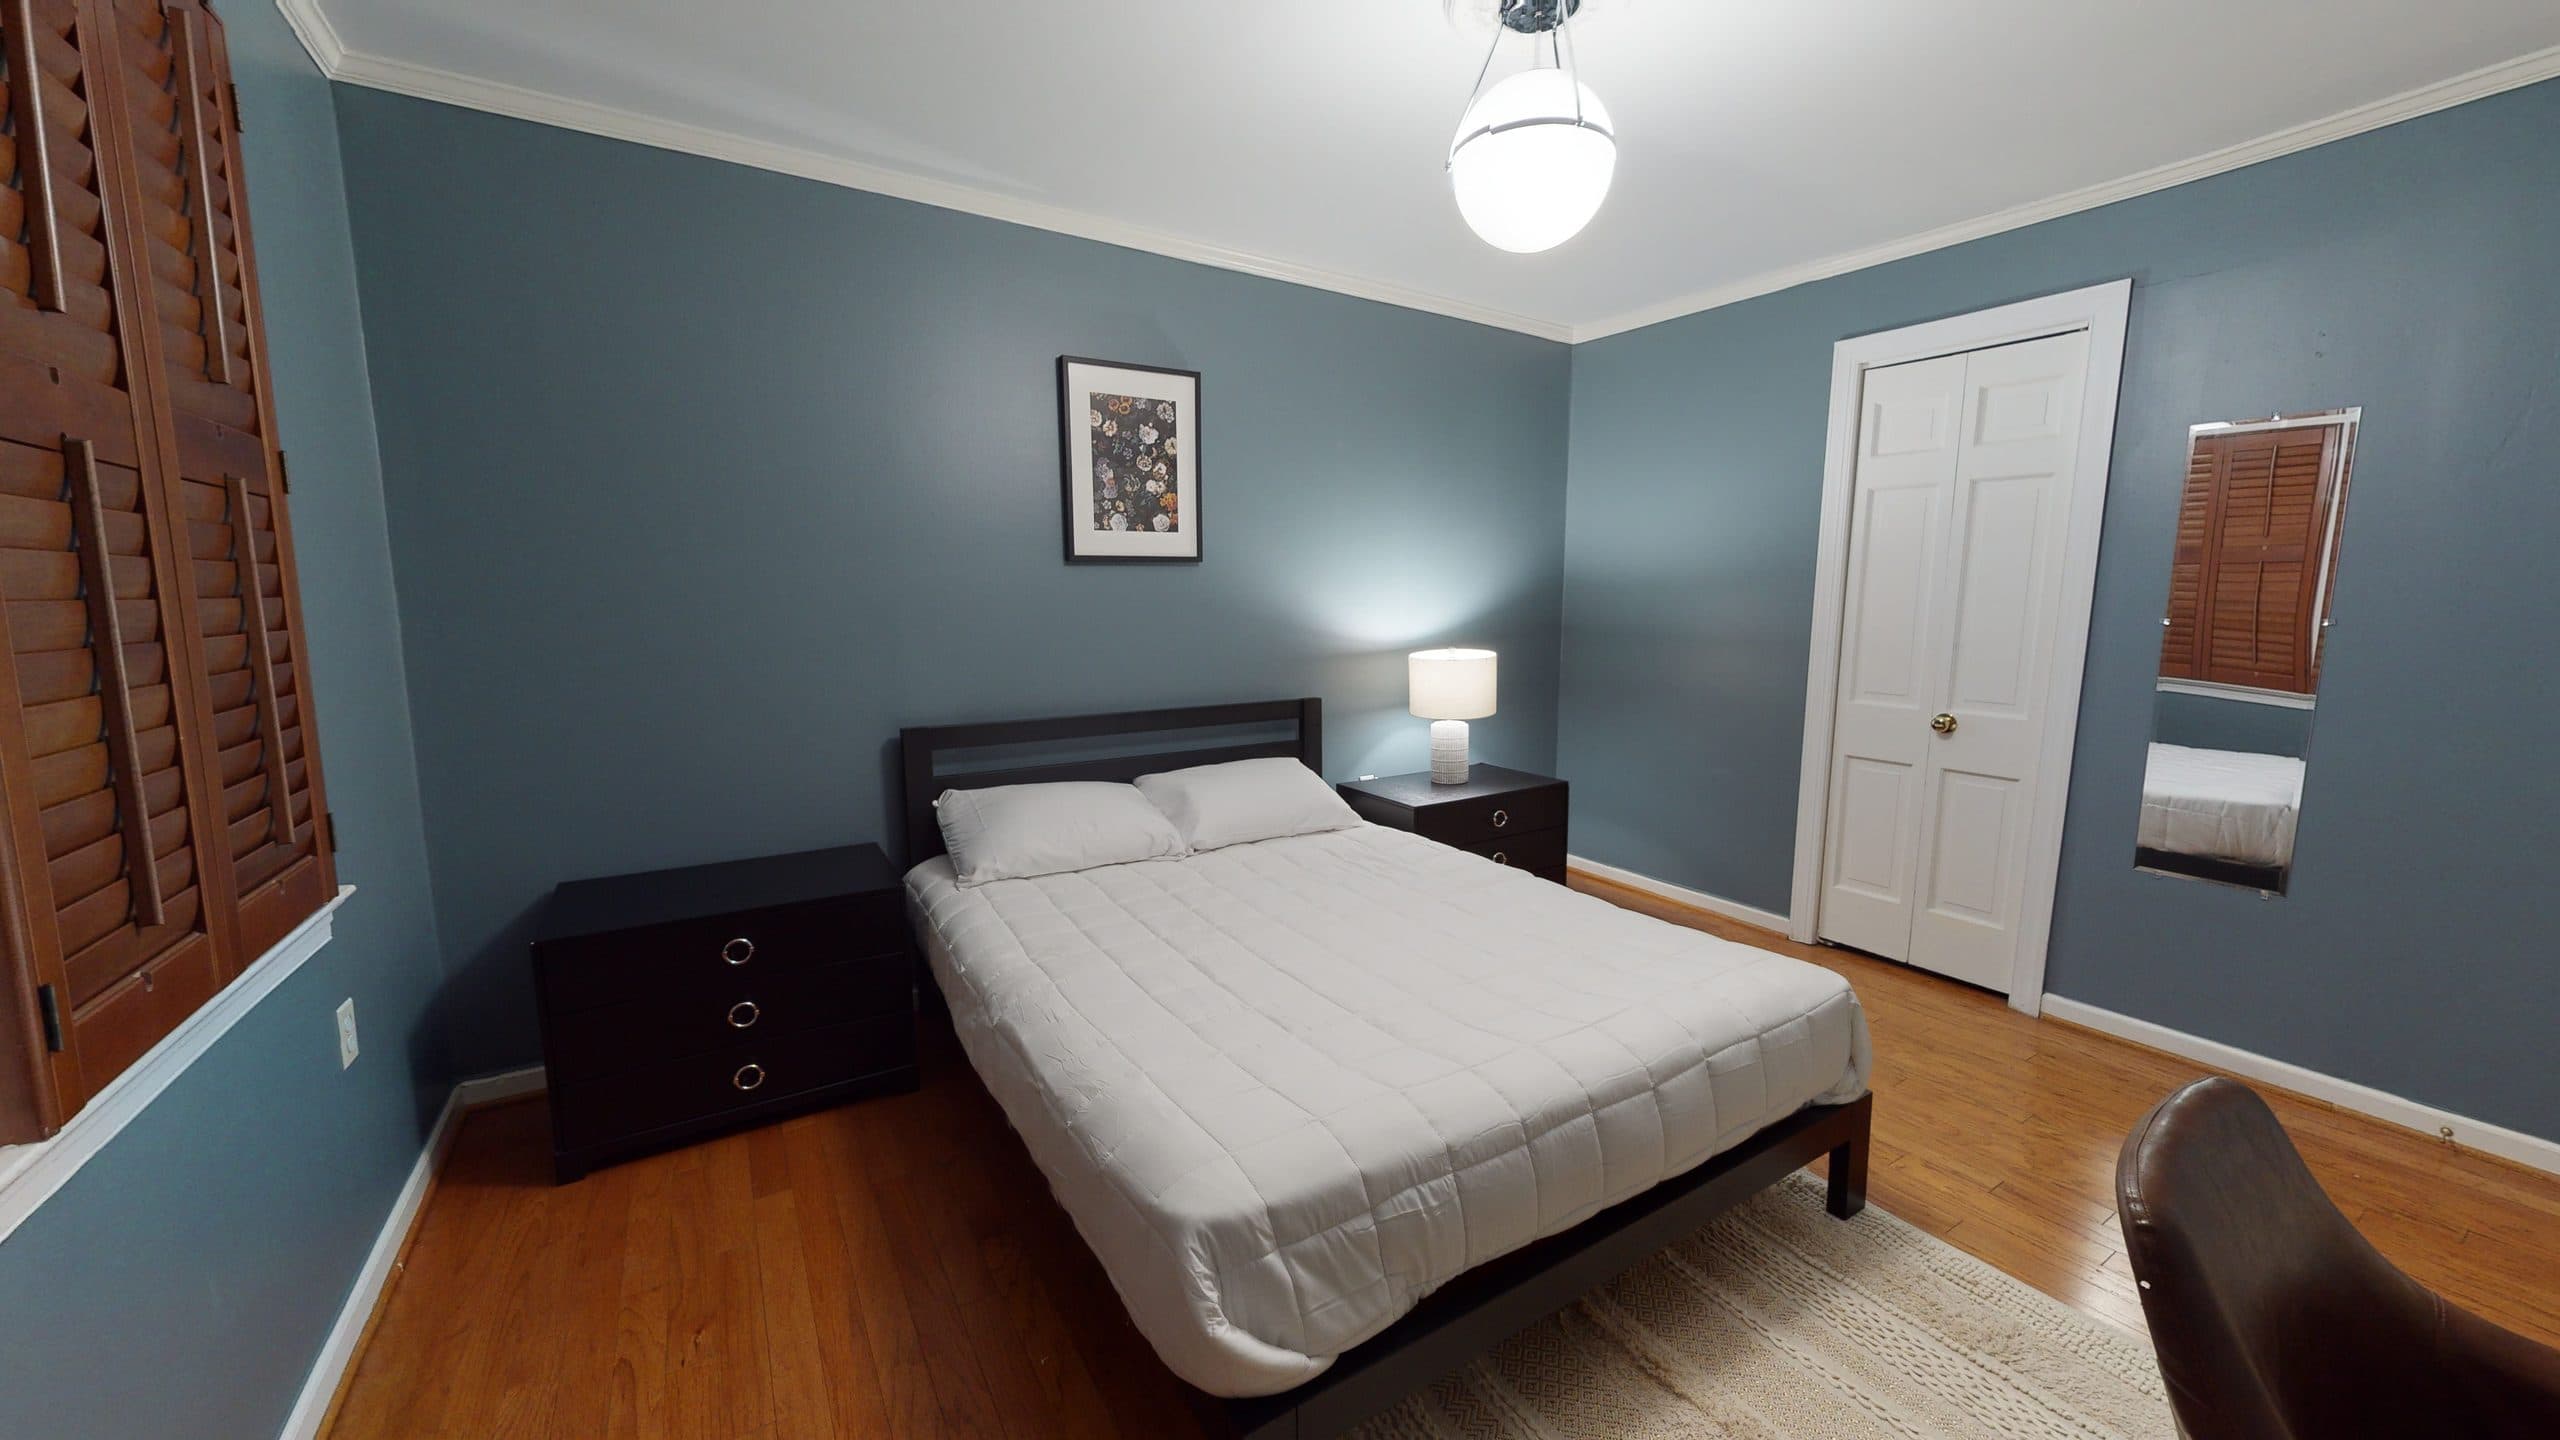 Photo 1 of #1430: Queen Bedroom 1A at June Homes